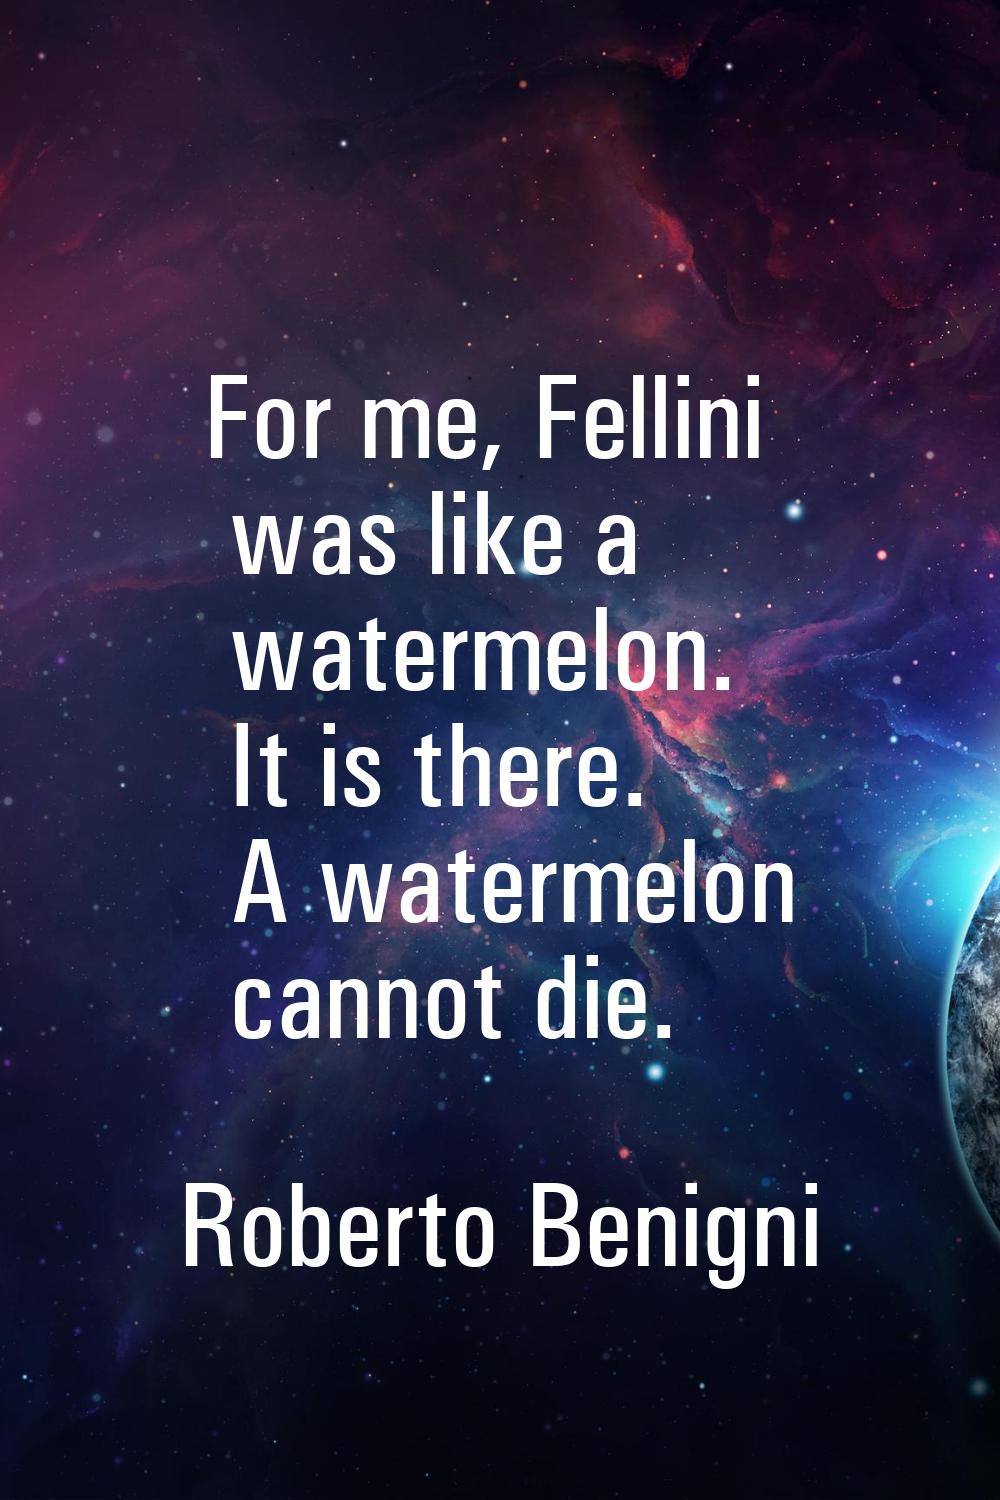 For me, Fellini was like a watermelon. It is there. A watermelon cannot die.